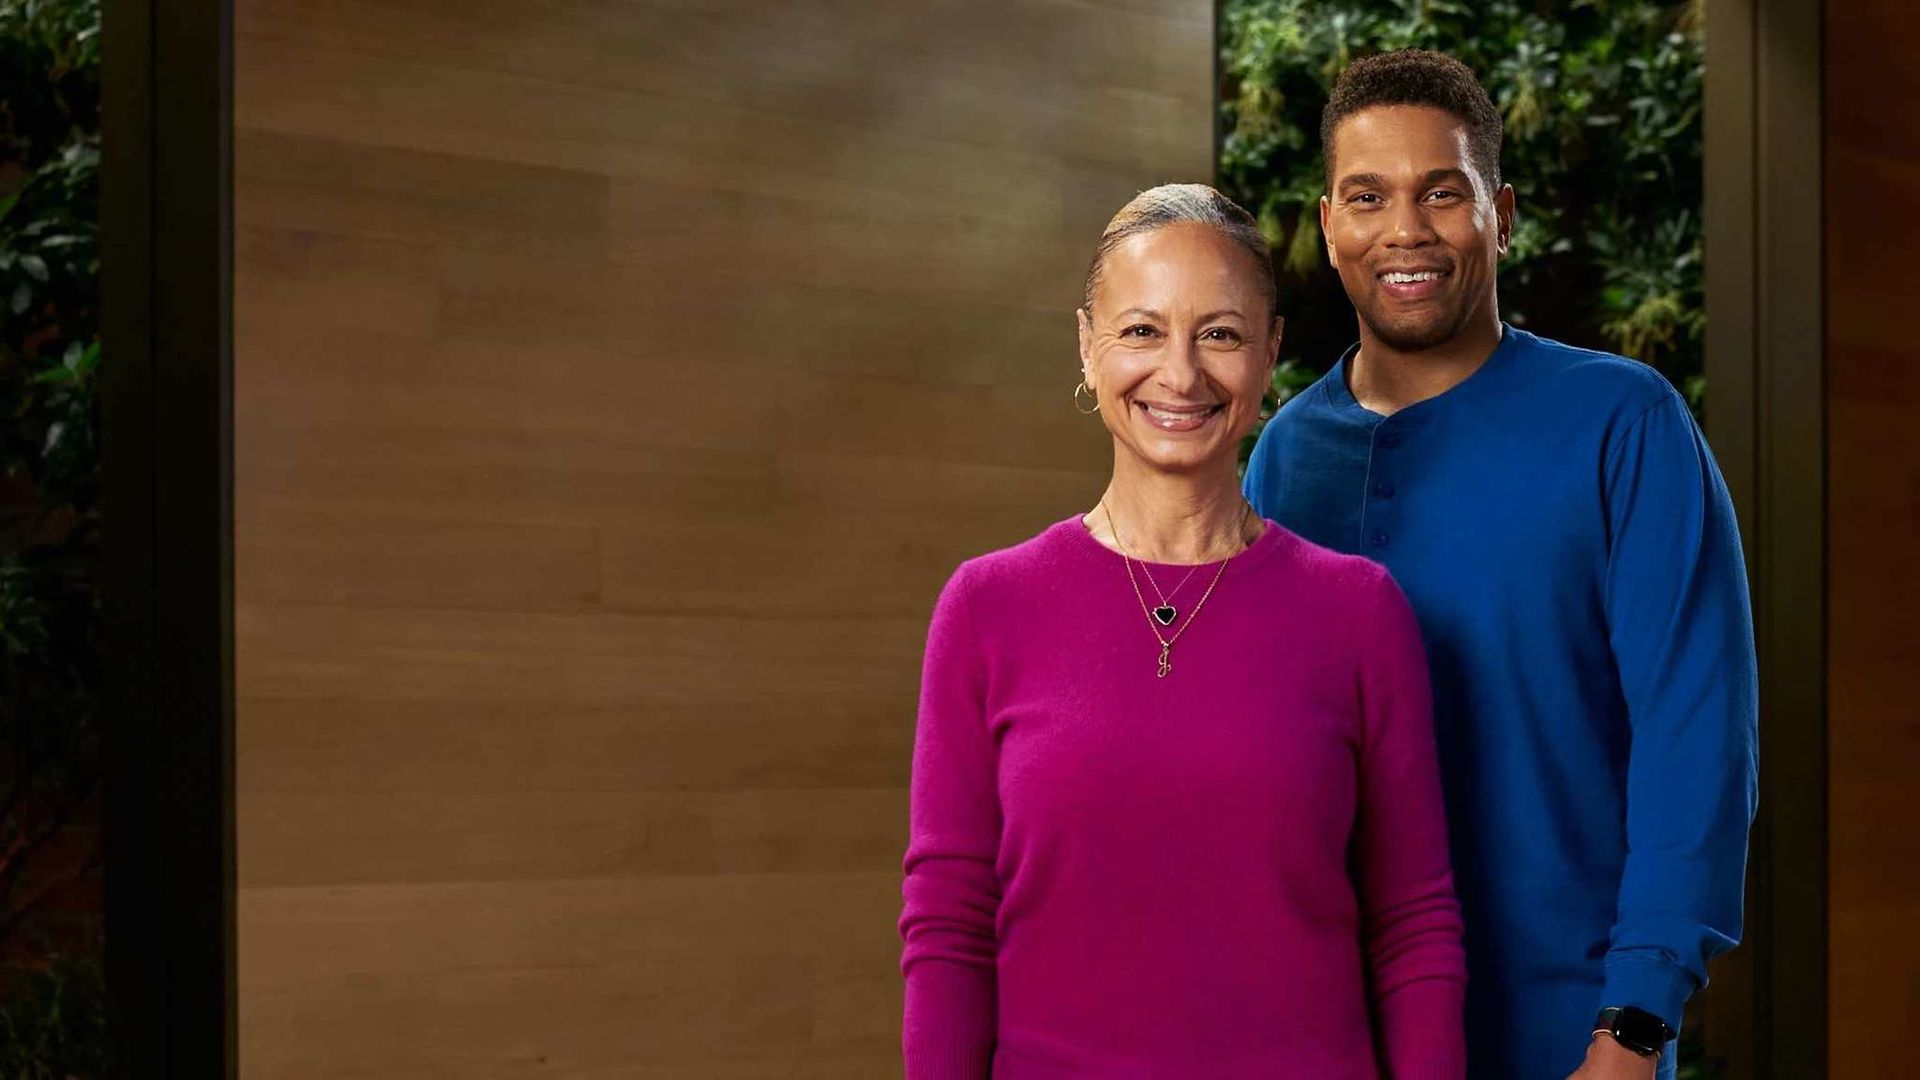 Apple Fitness+ launches 'Meditations to Strengthen Relationships